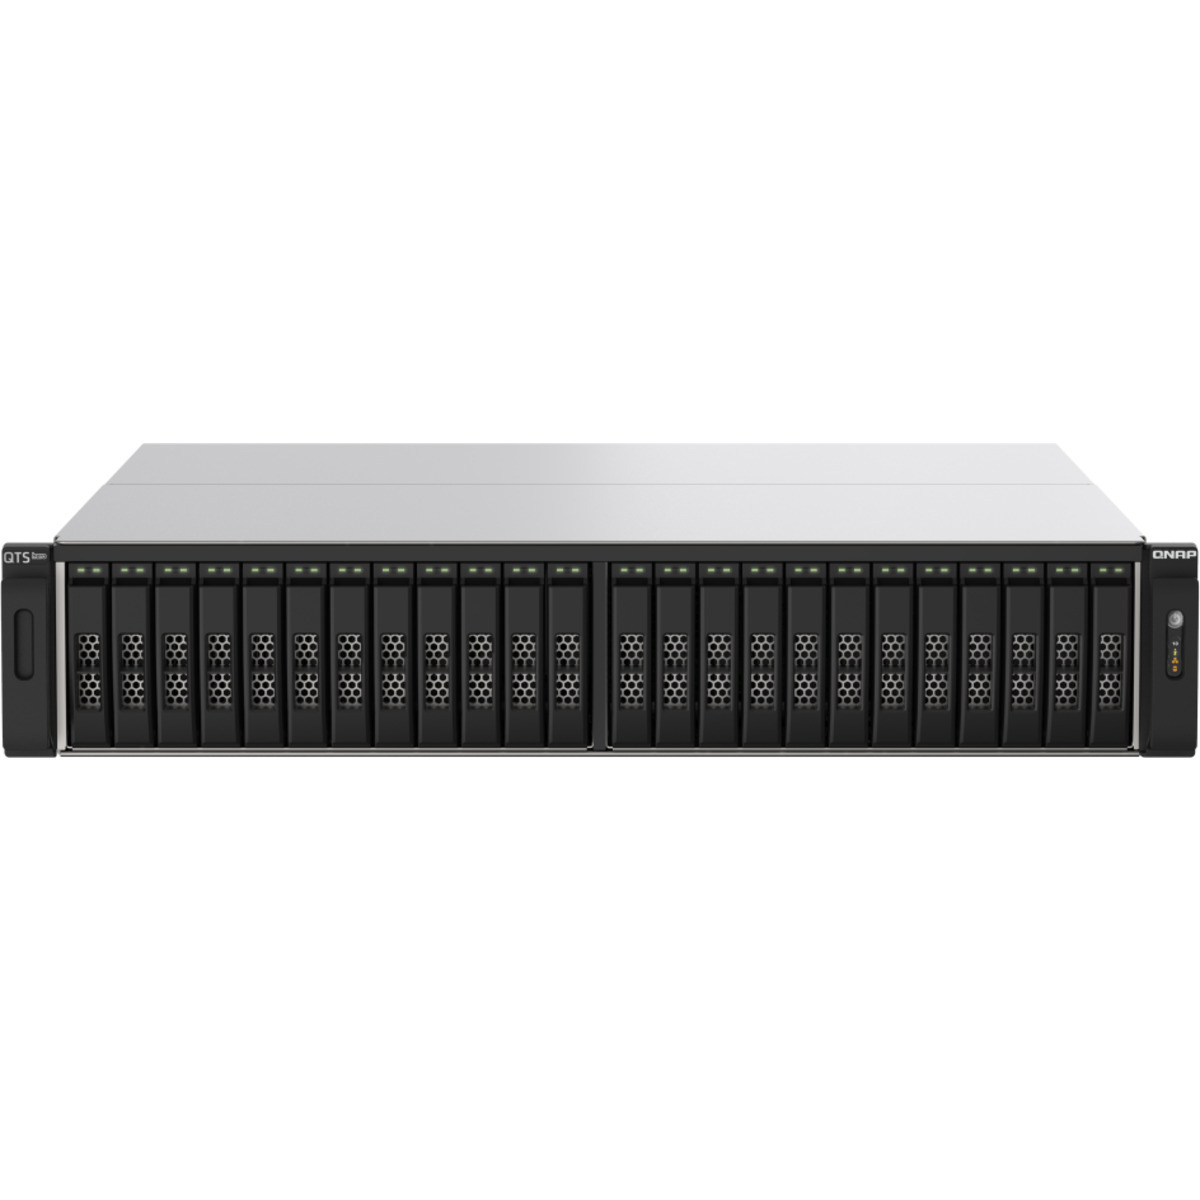 QNAP TS-h2490FU-7302P 68tb 24-Bay RackMount Large Business / Enterprise NAS - Network Attached Storage Device 17x4tb Sabrent Rocket 5 SB-RKT5-4TB  14000/12000MB/s M.2 2280 NVMe SSD CONSUMER Class Drives Installed - Burn-In Tested TS-h2490FU-7302P